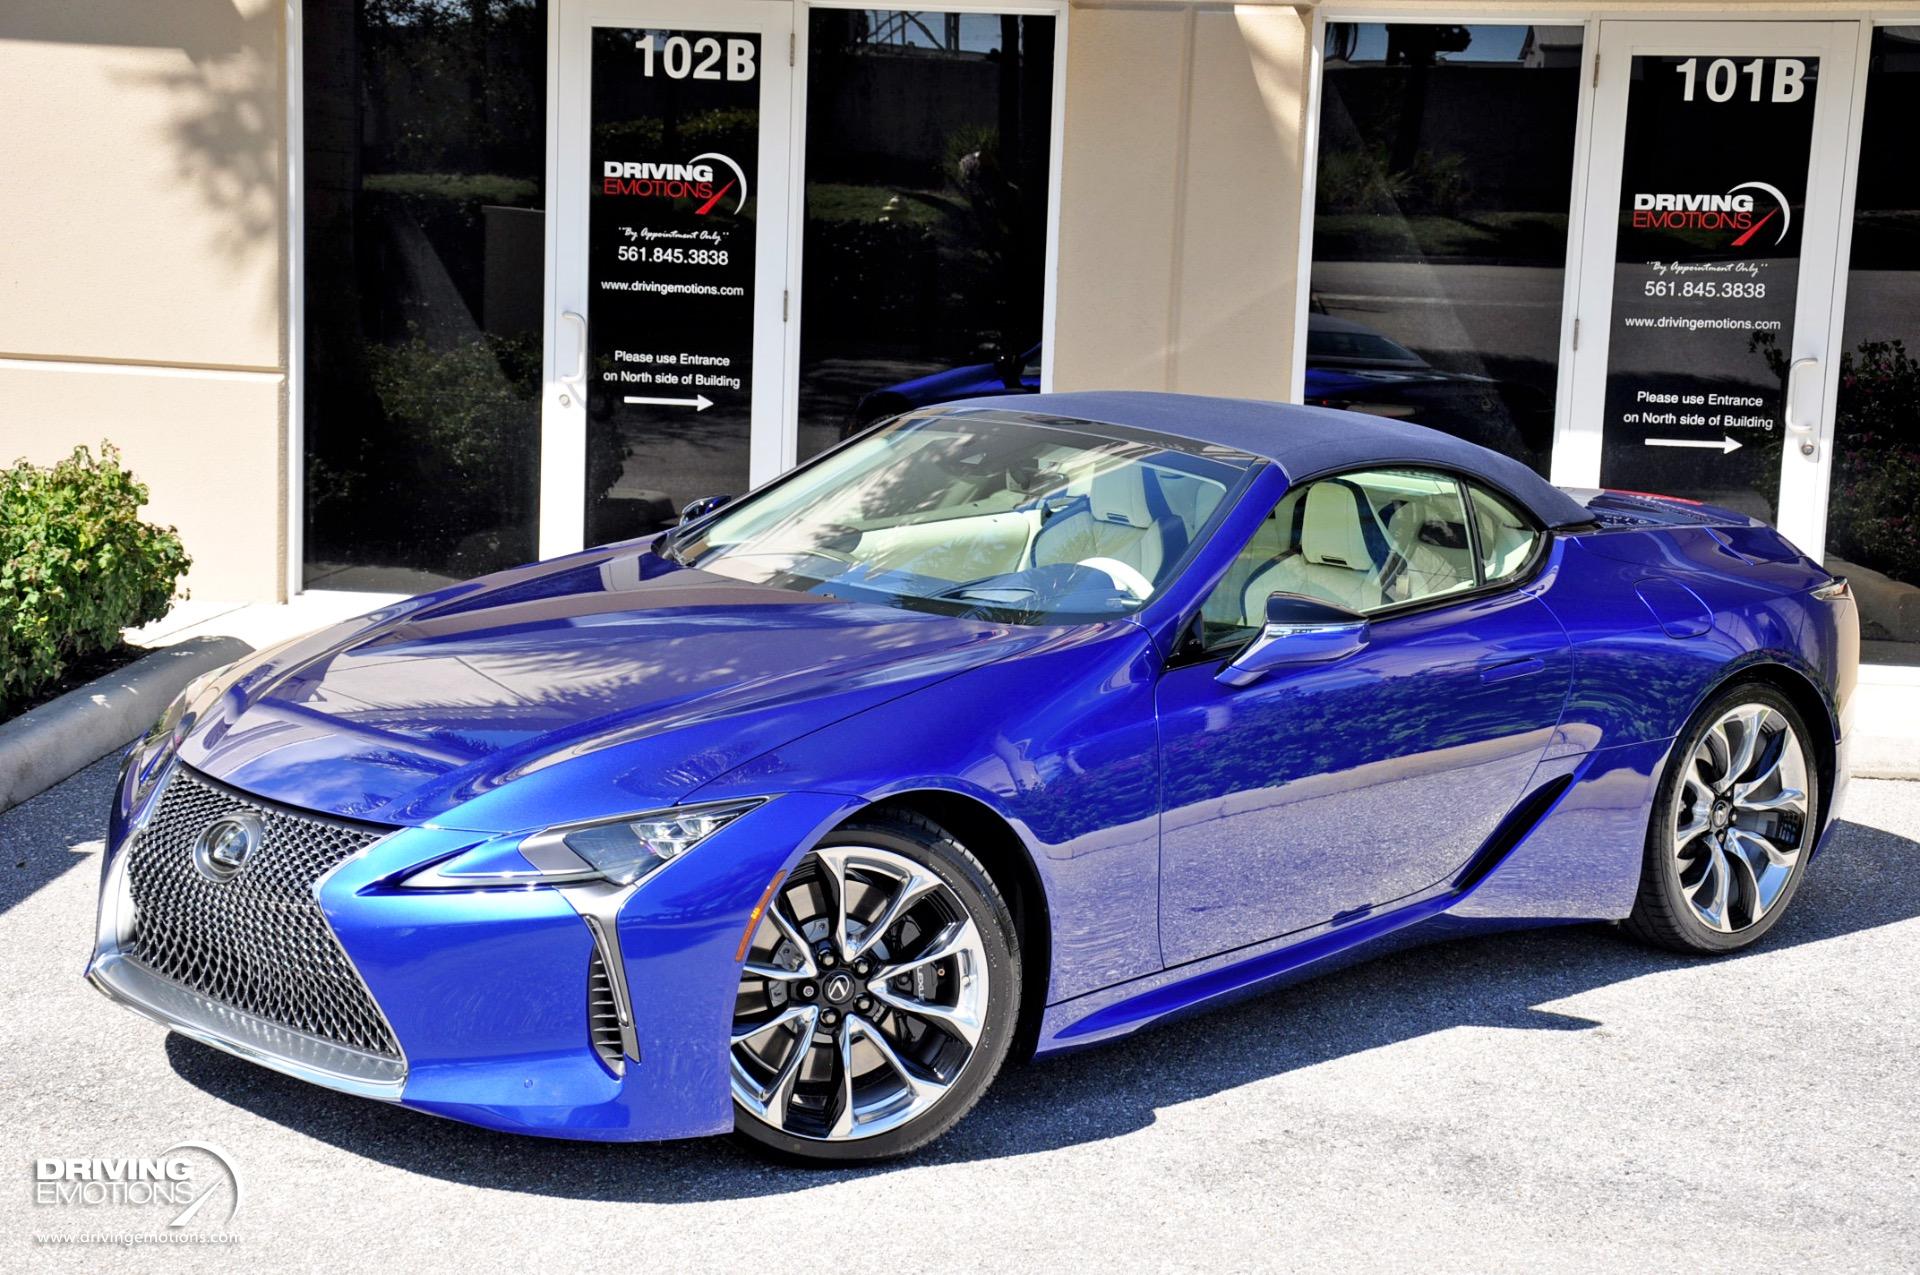 Used 2021 Lexus LC 500 Convertible Inspiration Series! Number 86 of 100 Built! RARE!! | Lake Park, FL